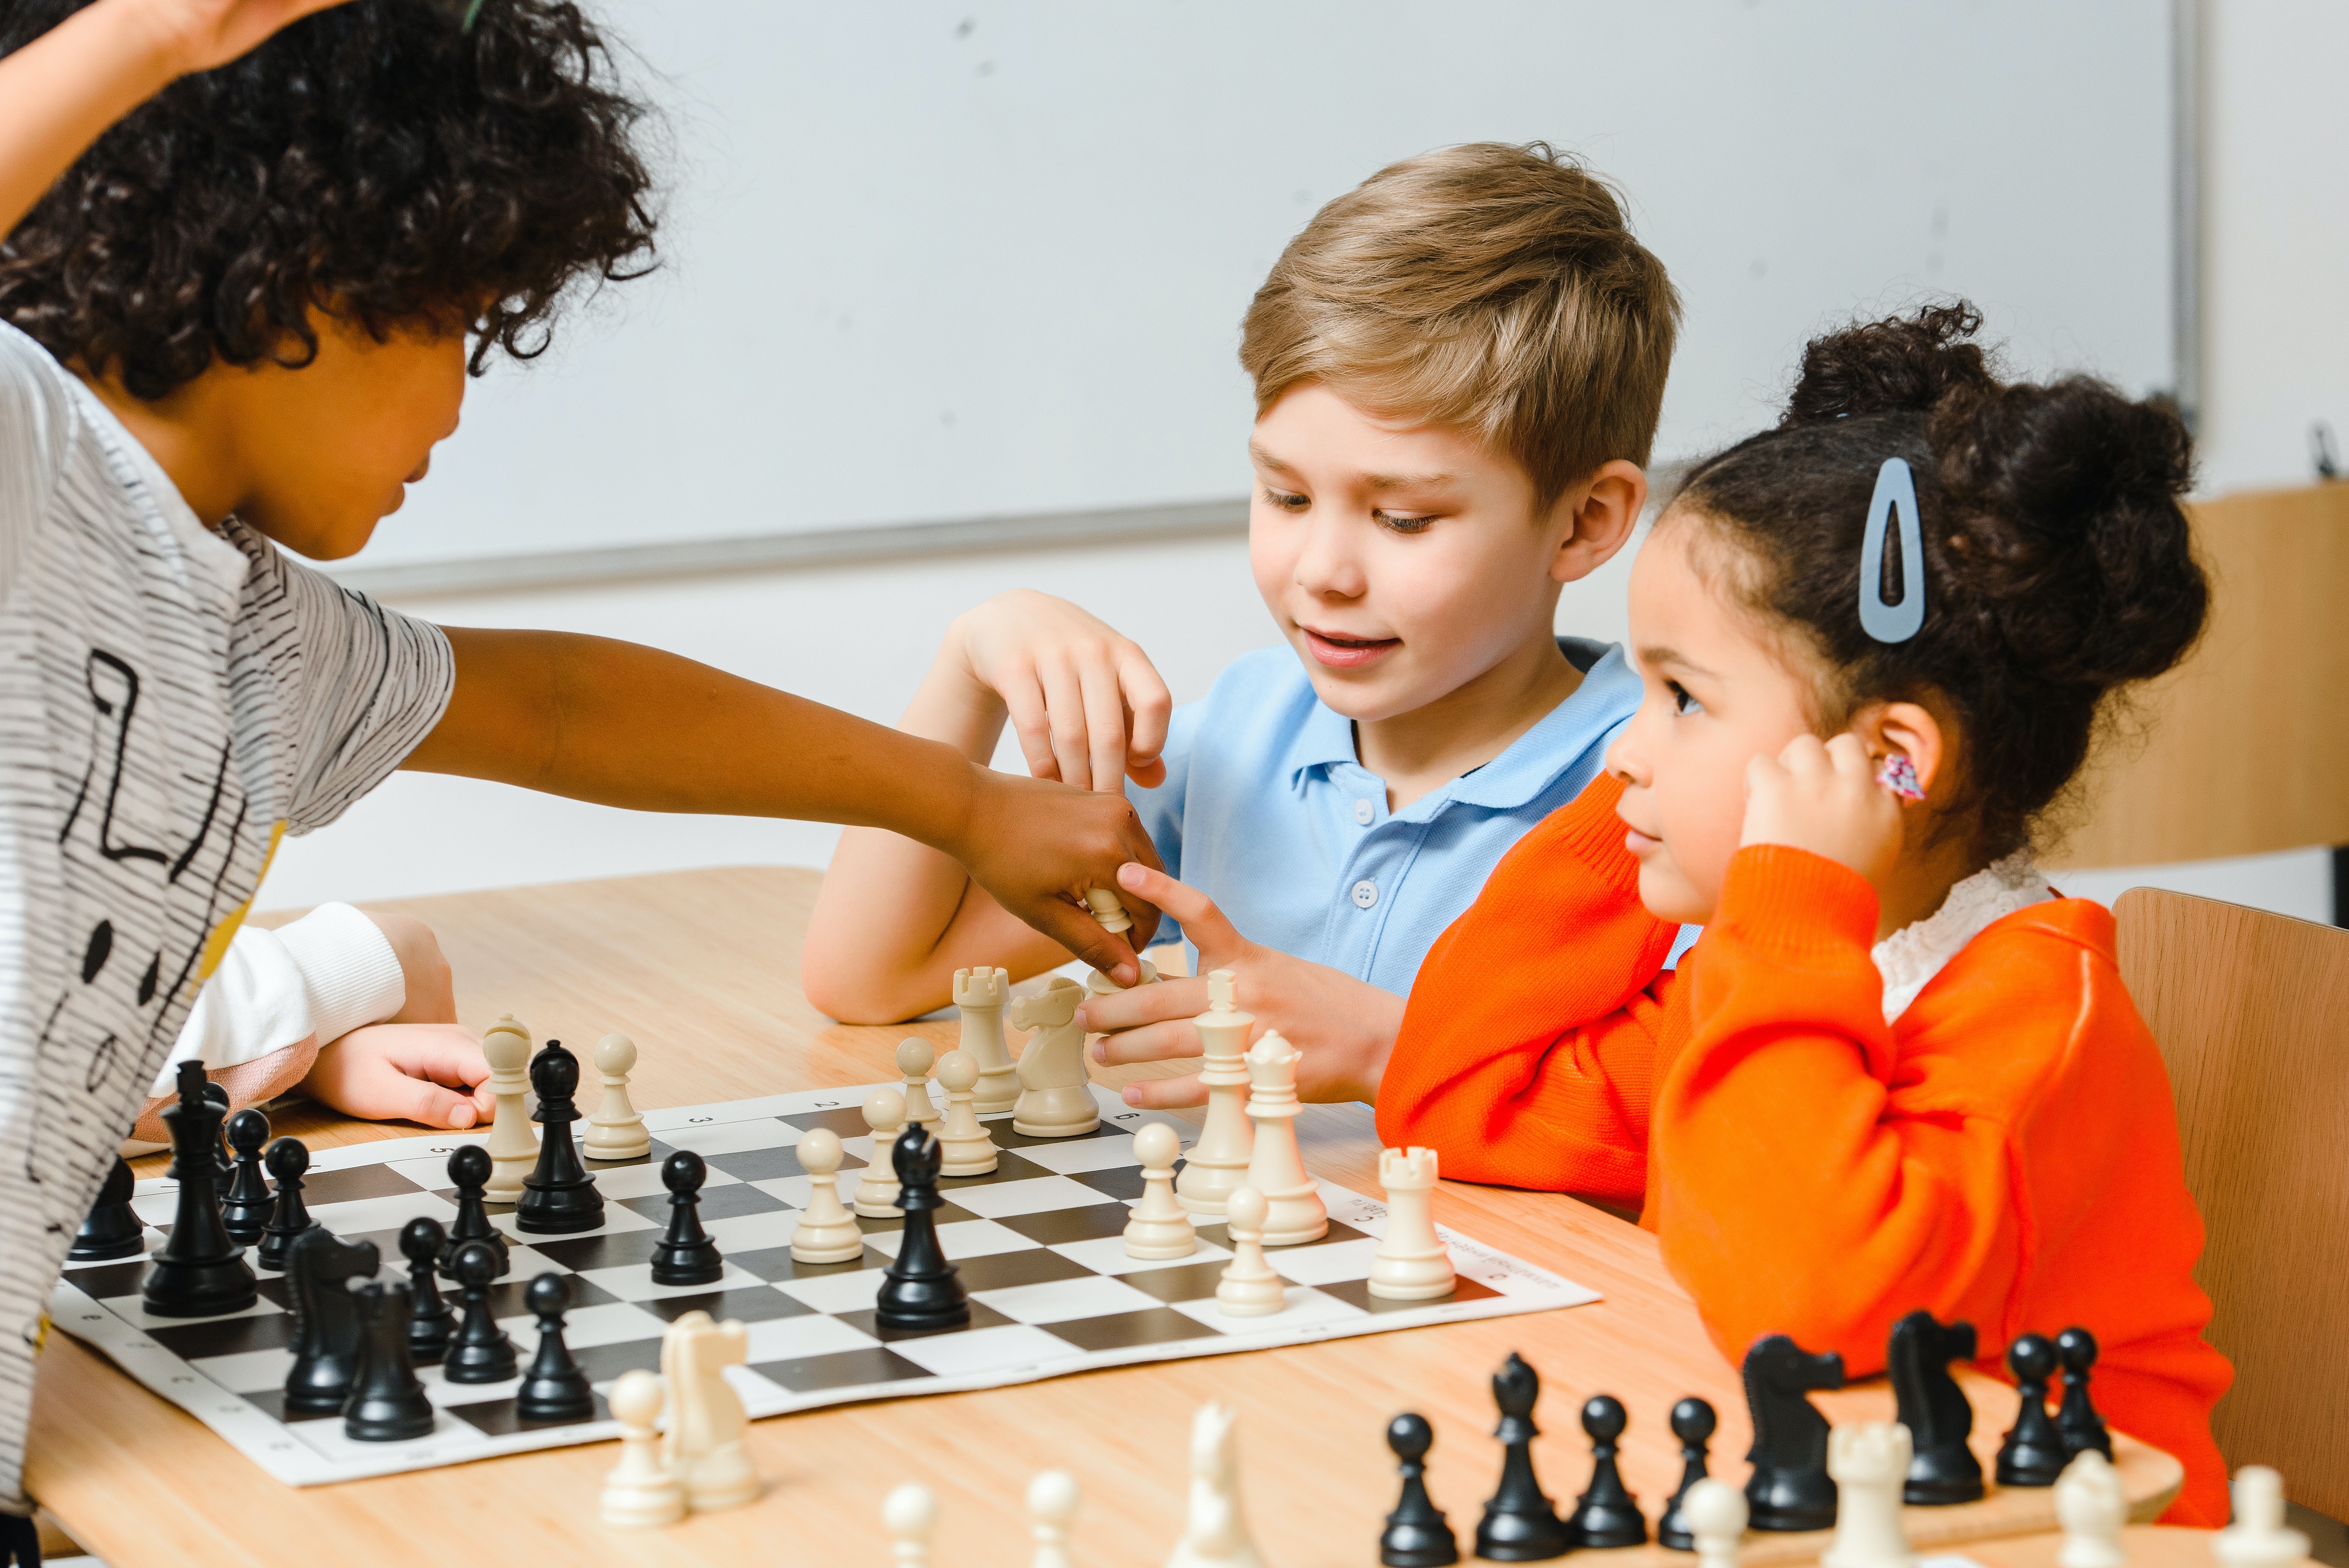 A group of kids are playing chess, one standing with his arm across the board reaching for a piece.